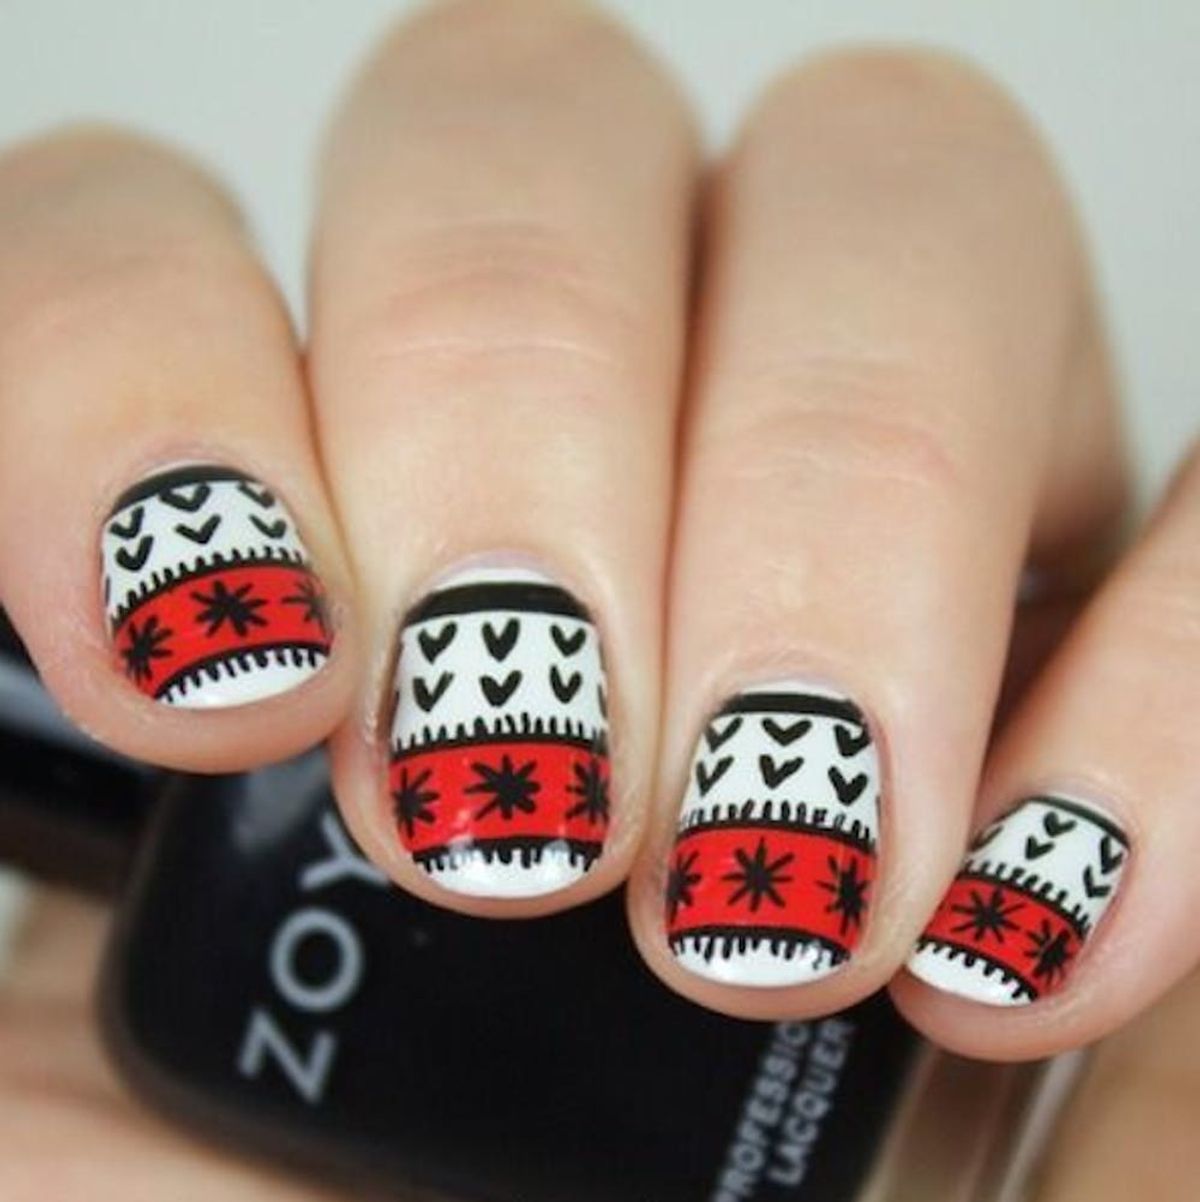 14 Fair Isle Nail Art Designs Just in Time for #SweaterWeather